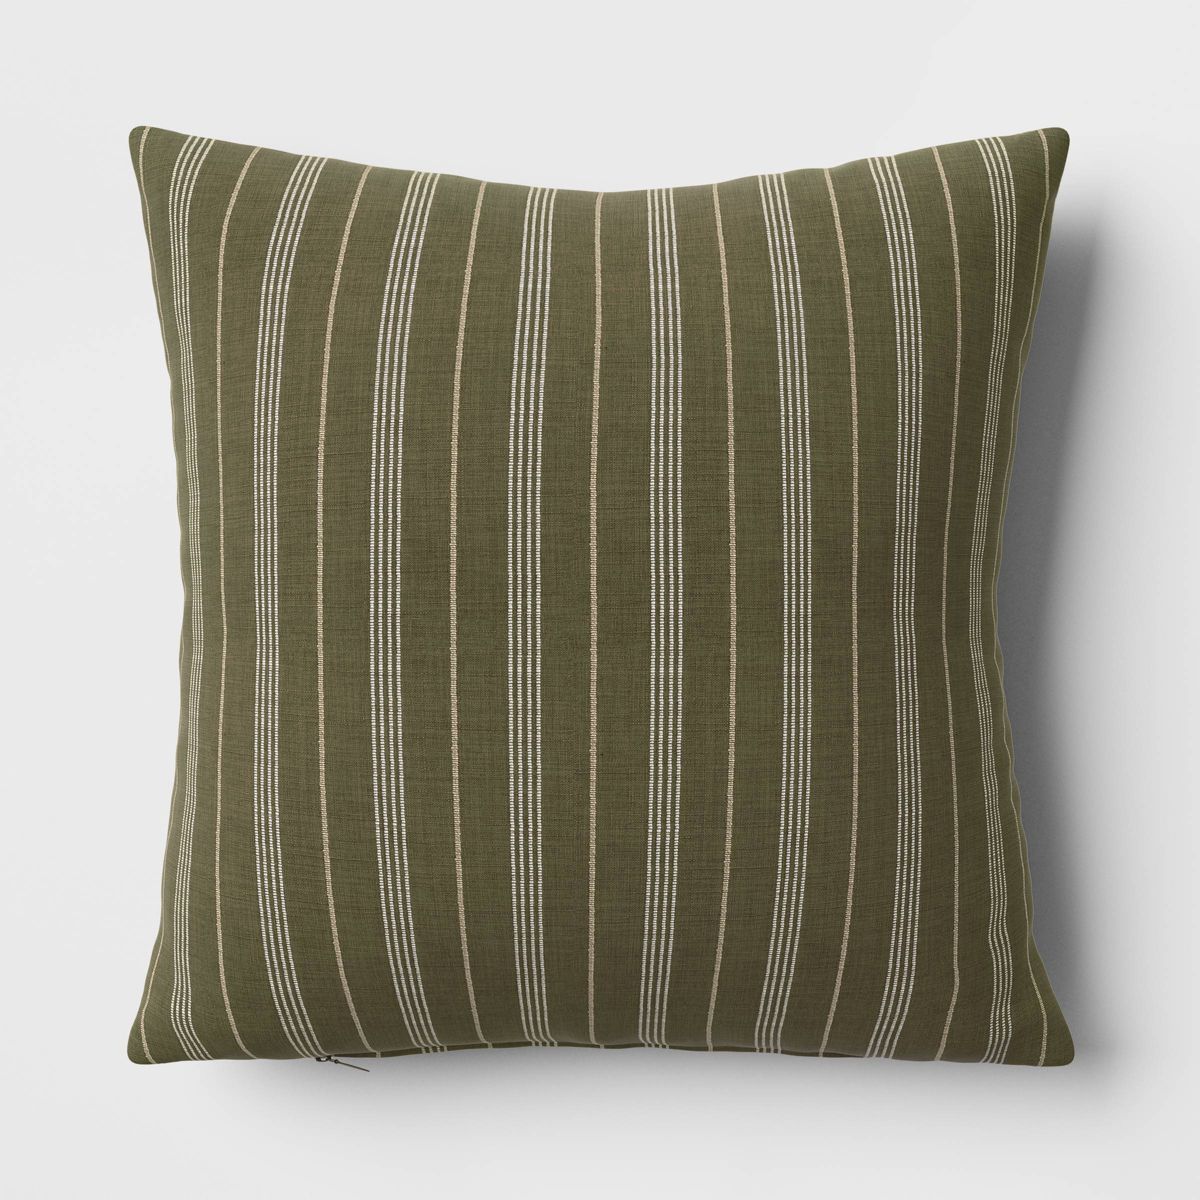 Cotton Flax Woven Striped Square Throw Pillow Dark Olive Green - Threshold™ | Target